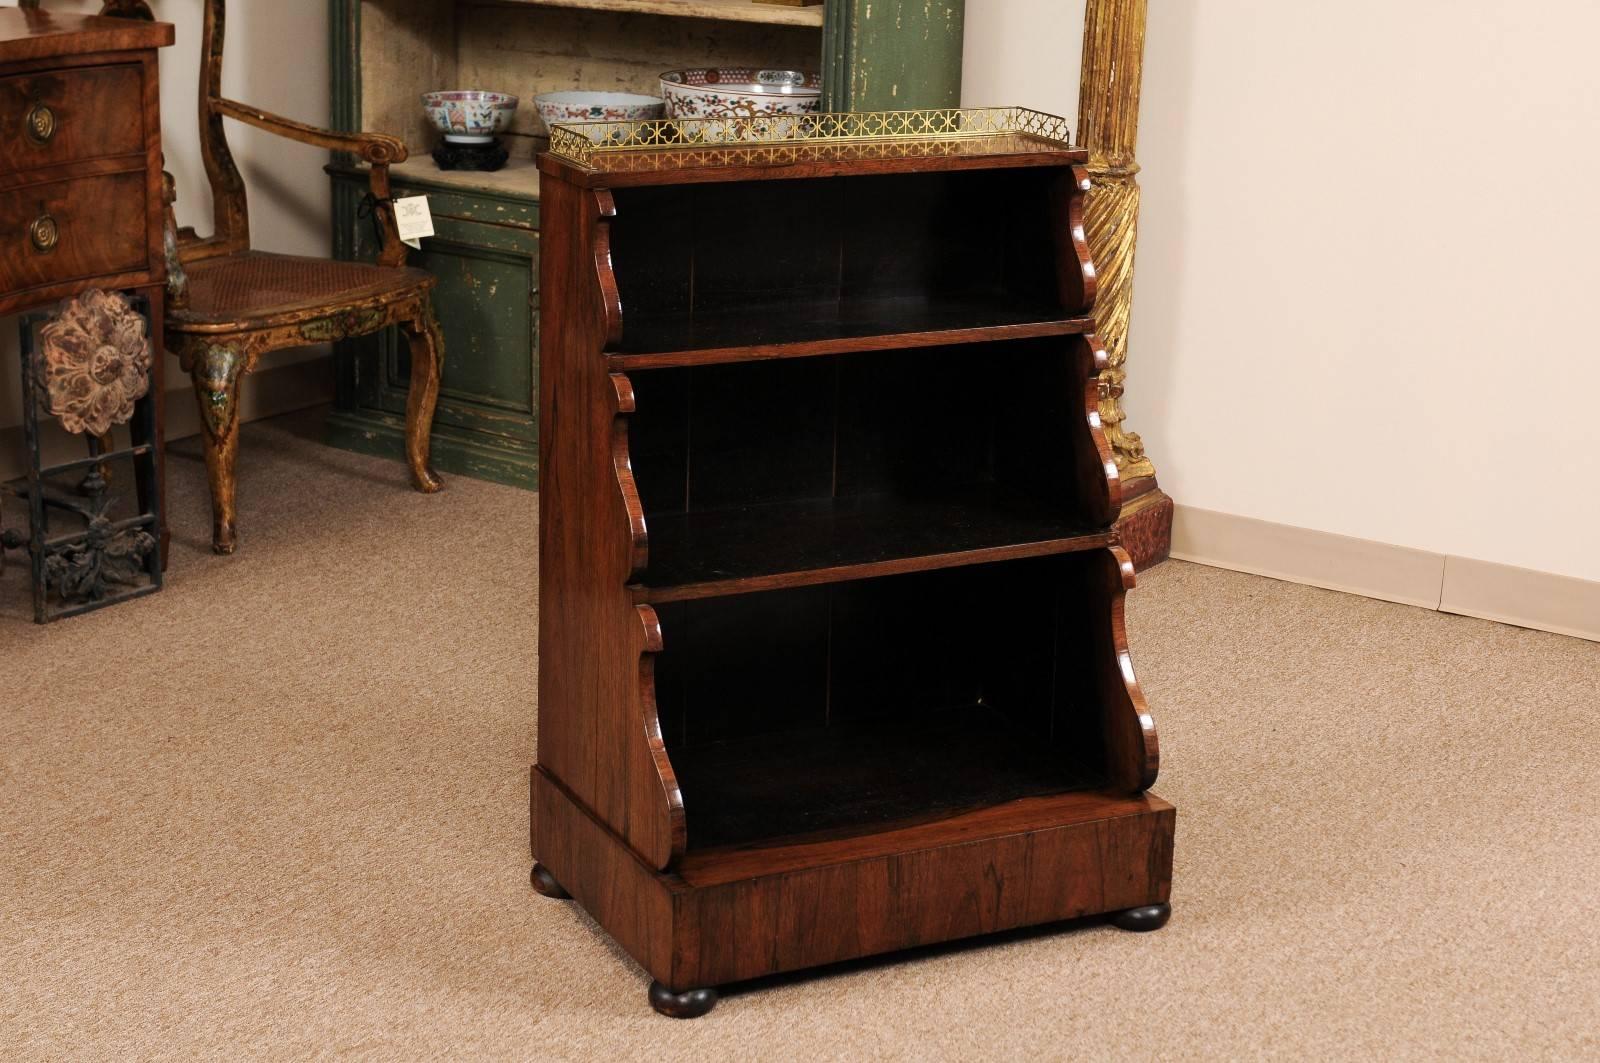 Regency petite waterfall petite bookcase in rosewood with brass gallery and bun feet.

William Word fine antiques: Atlanta's source for antique interiors since 1956. 

 